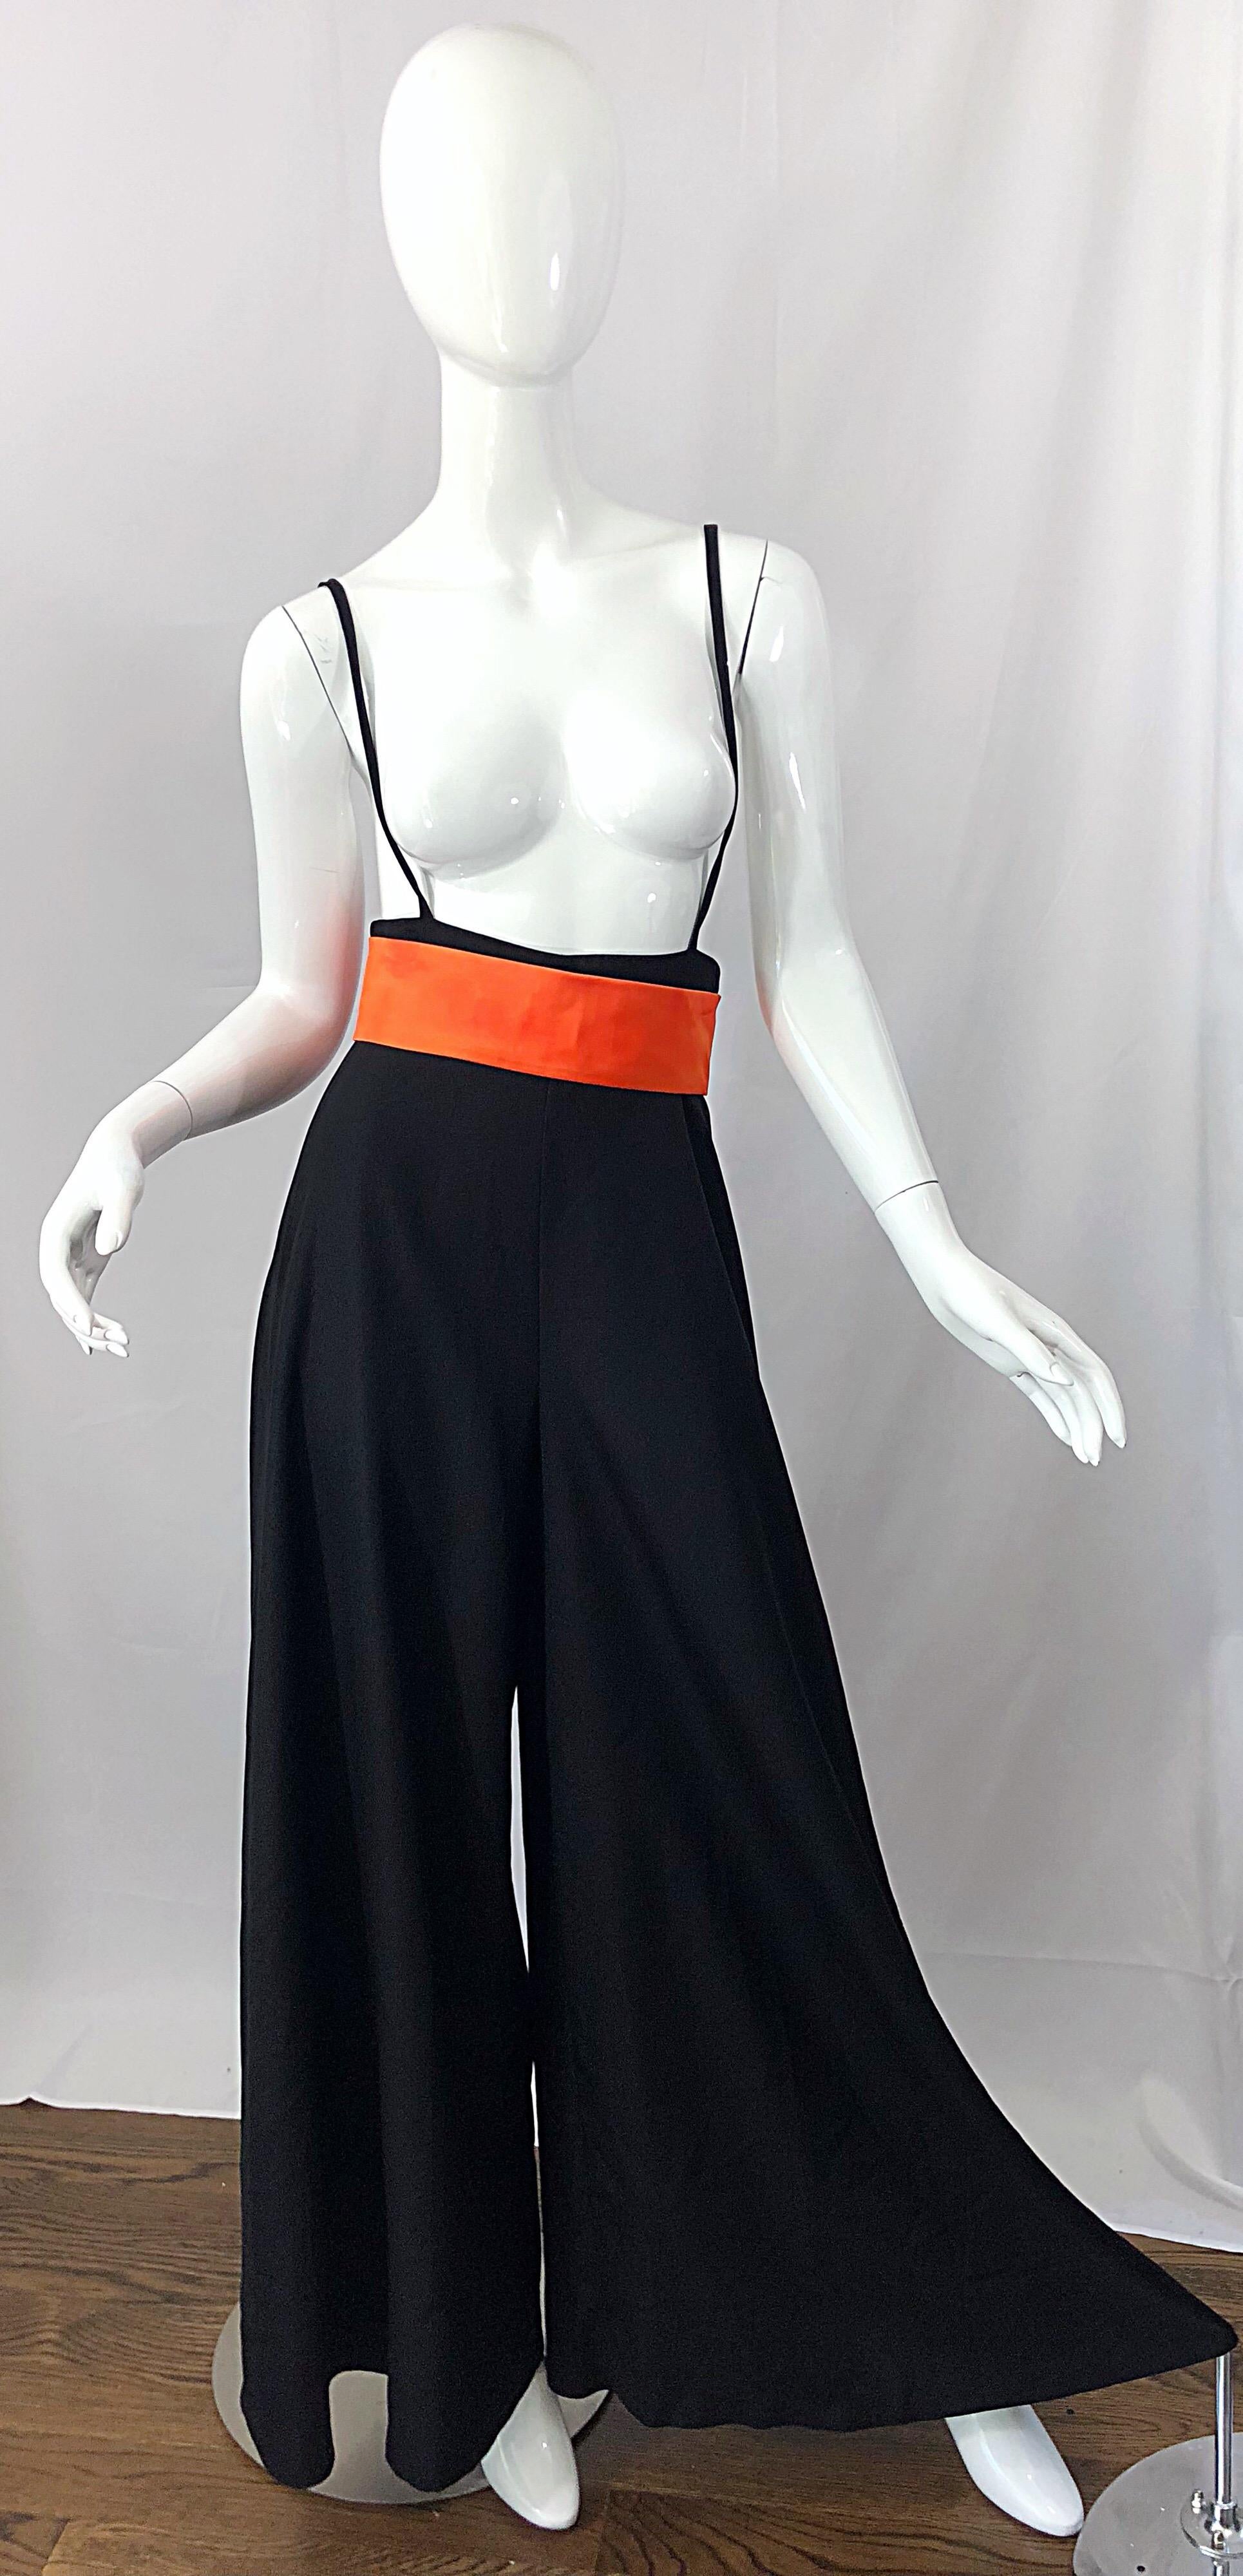 Rare 1970s LILLI DIAMOND black and orange high waisted wide leg suspender palazzo pants! Soft knit fabric stretches to fit. Hidden zipper up the back with hook-and-eye closure. Attached suspenders and the attached bright orange belt add the perfect